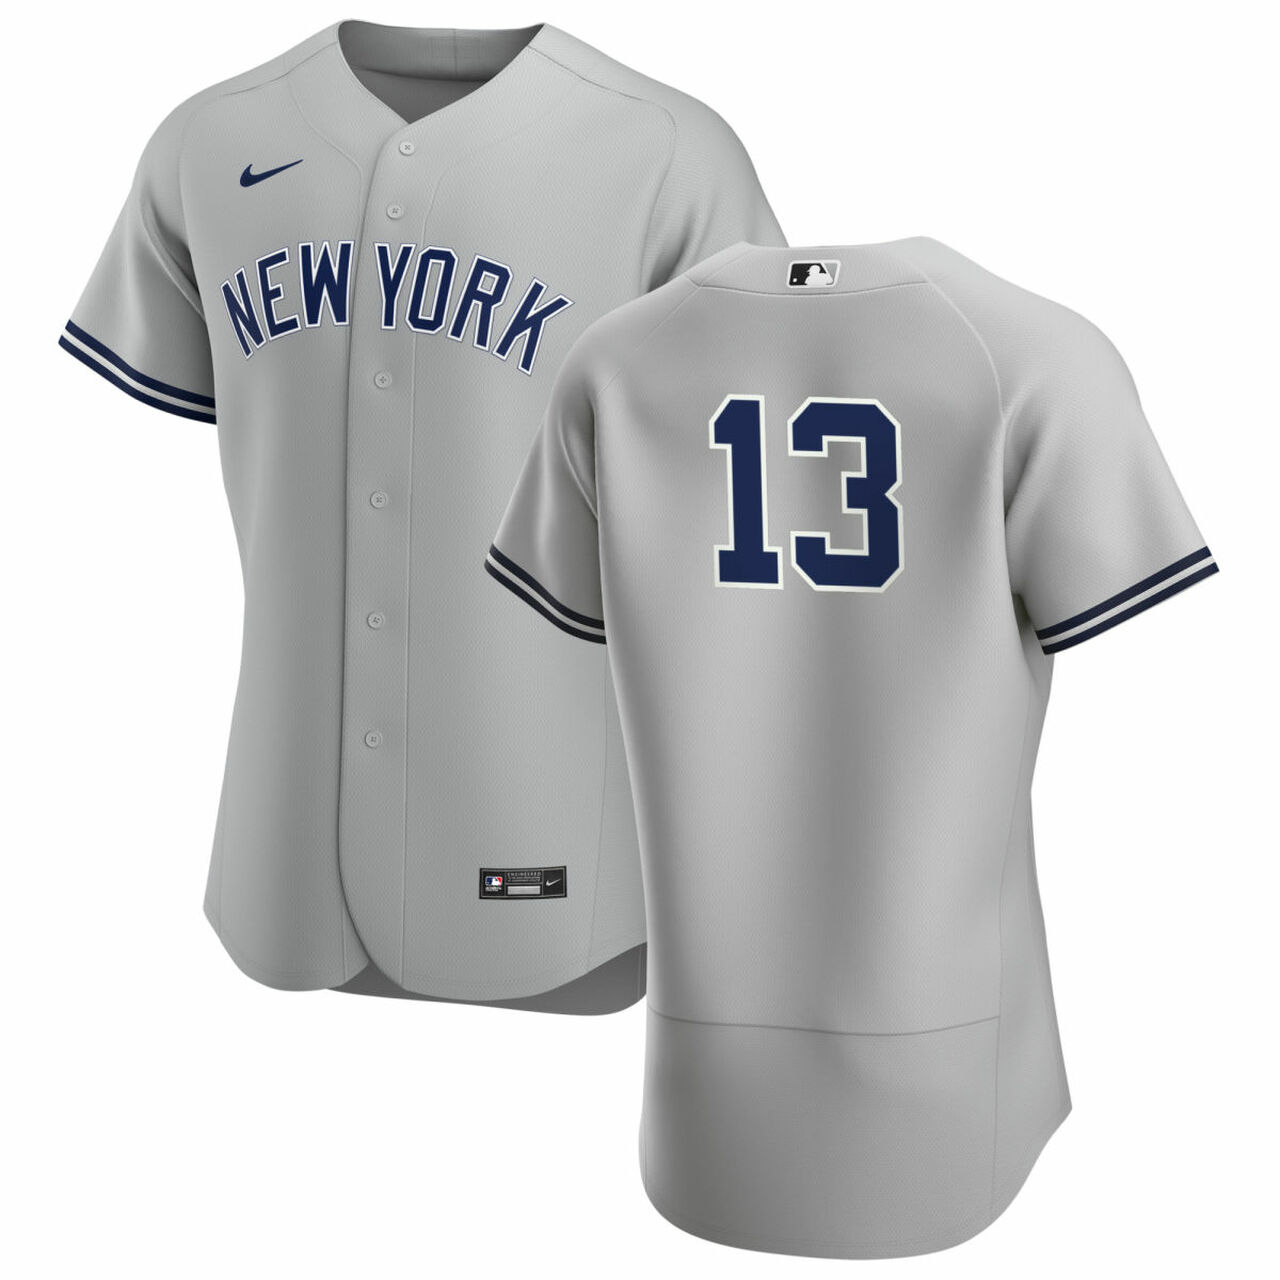 New York Yankees #13 Joey Gallo Men's Nike Gray Authentic Road MLB Jersey - No Name